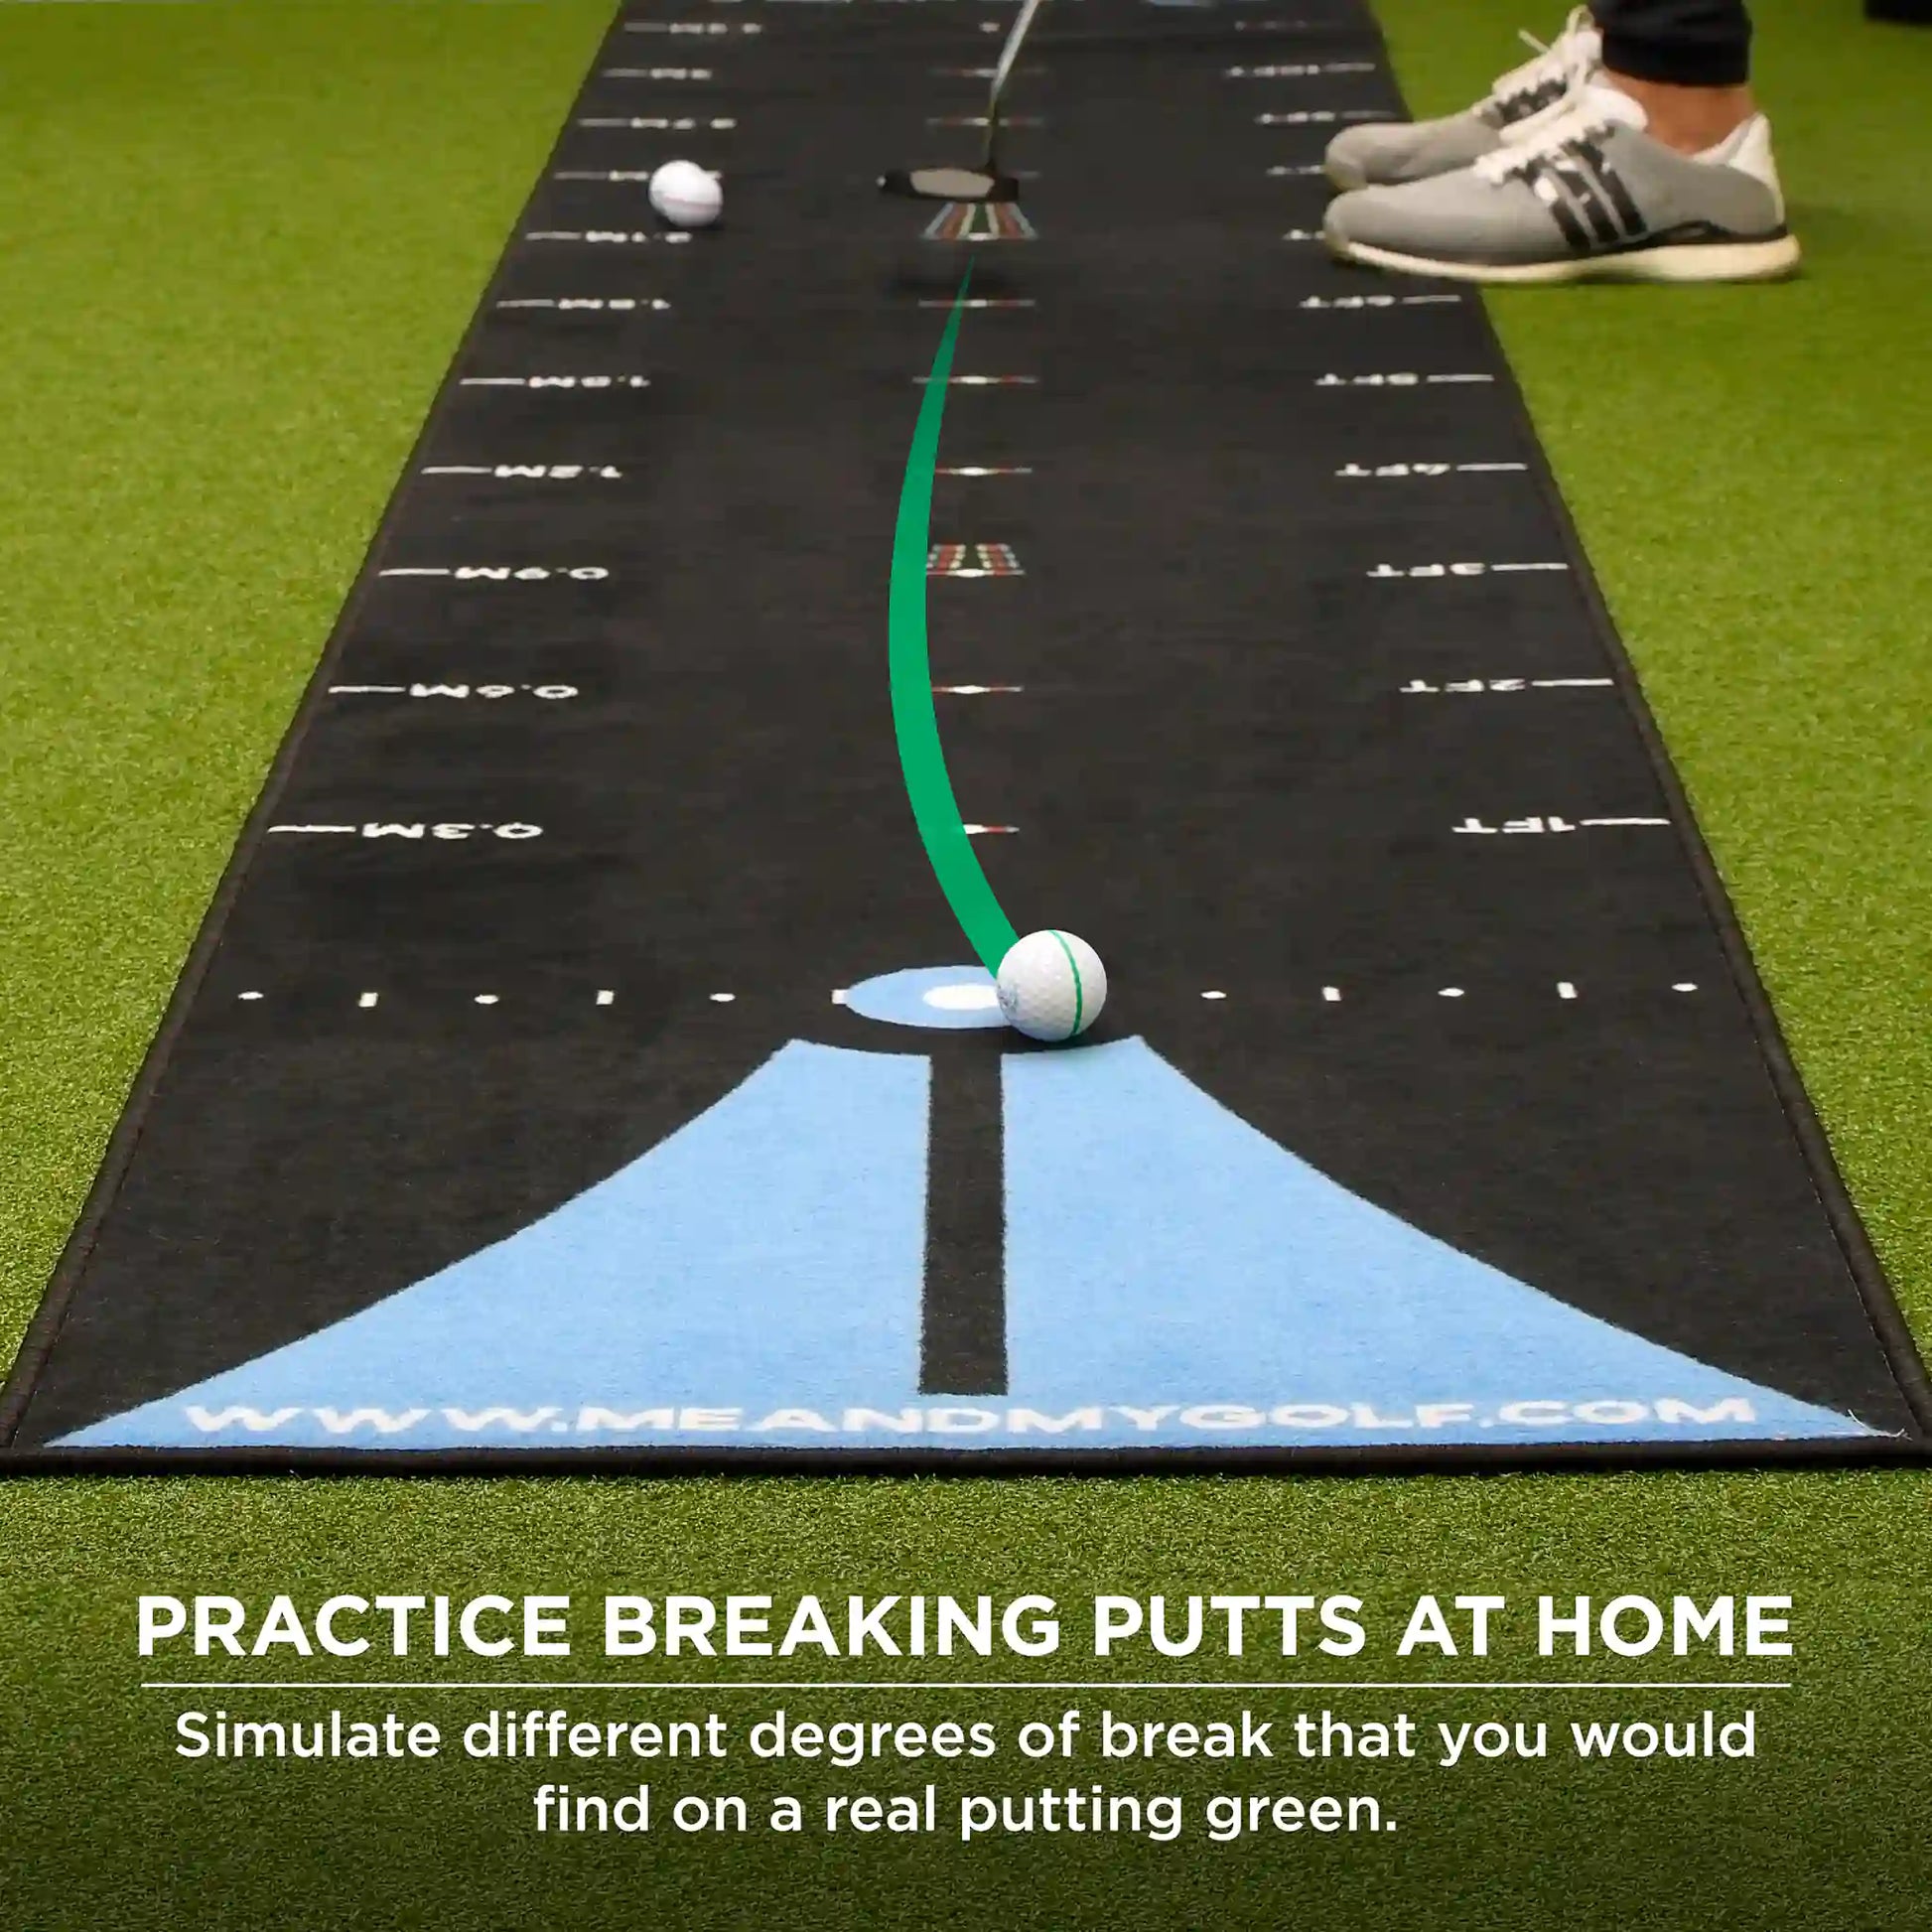 Practice breaking putts at home